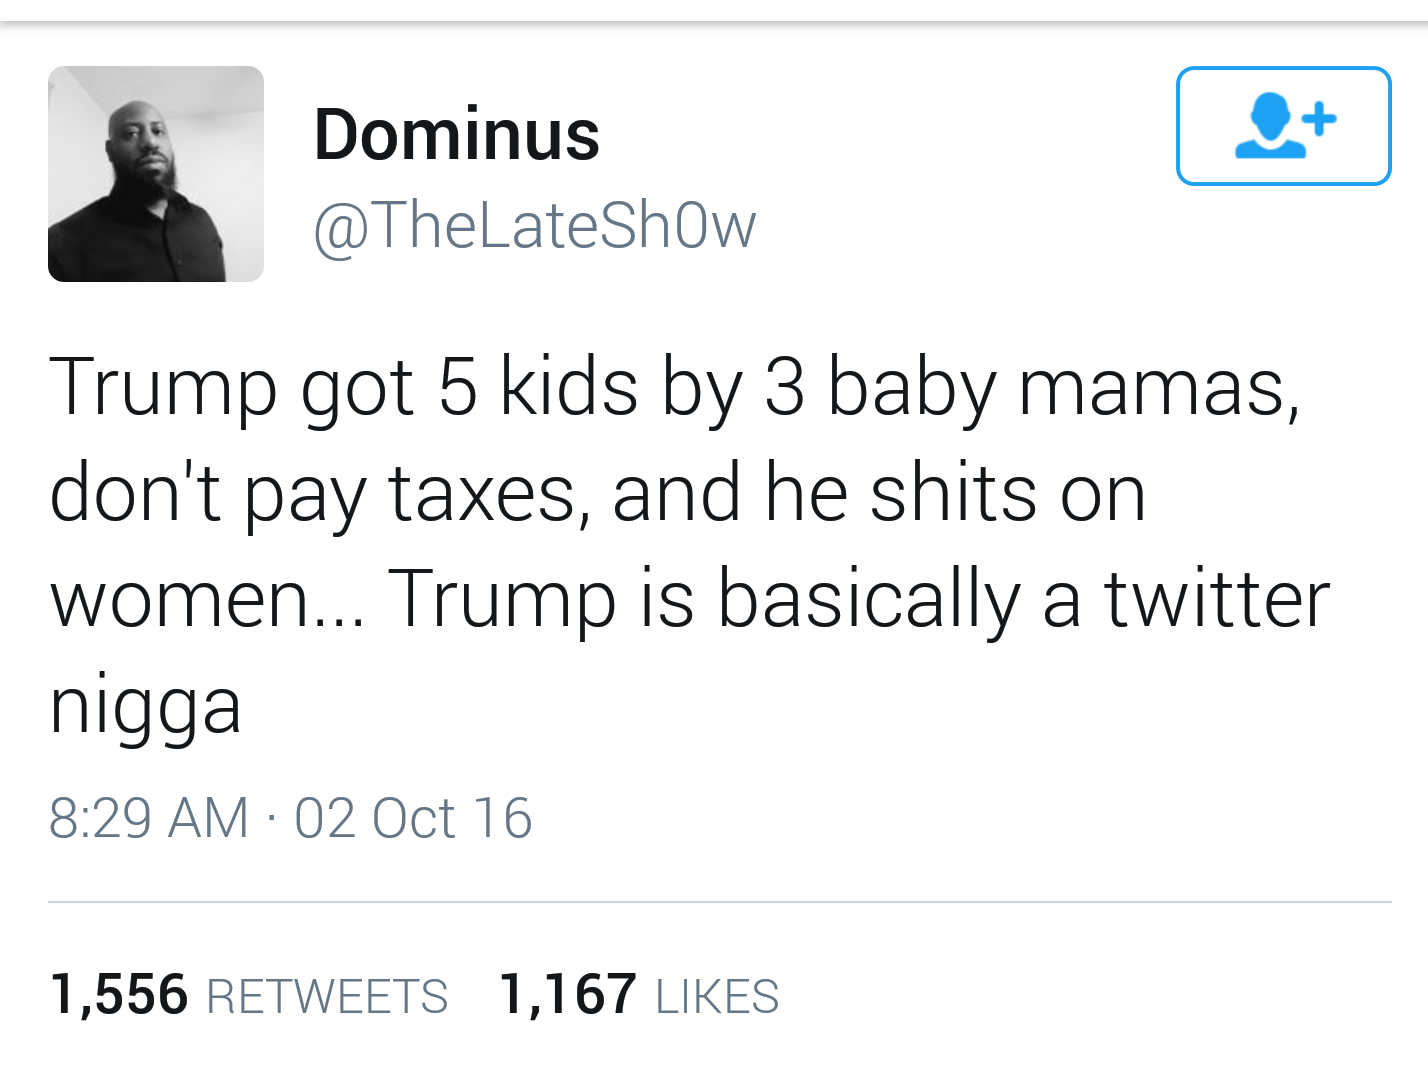 5 kids by 3 baby mamas, don't pay taxes...